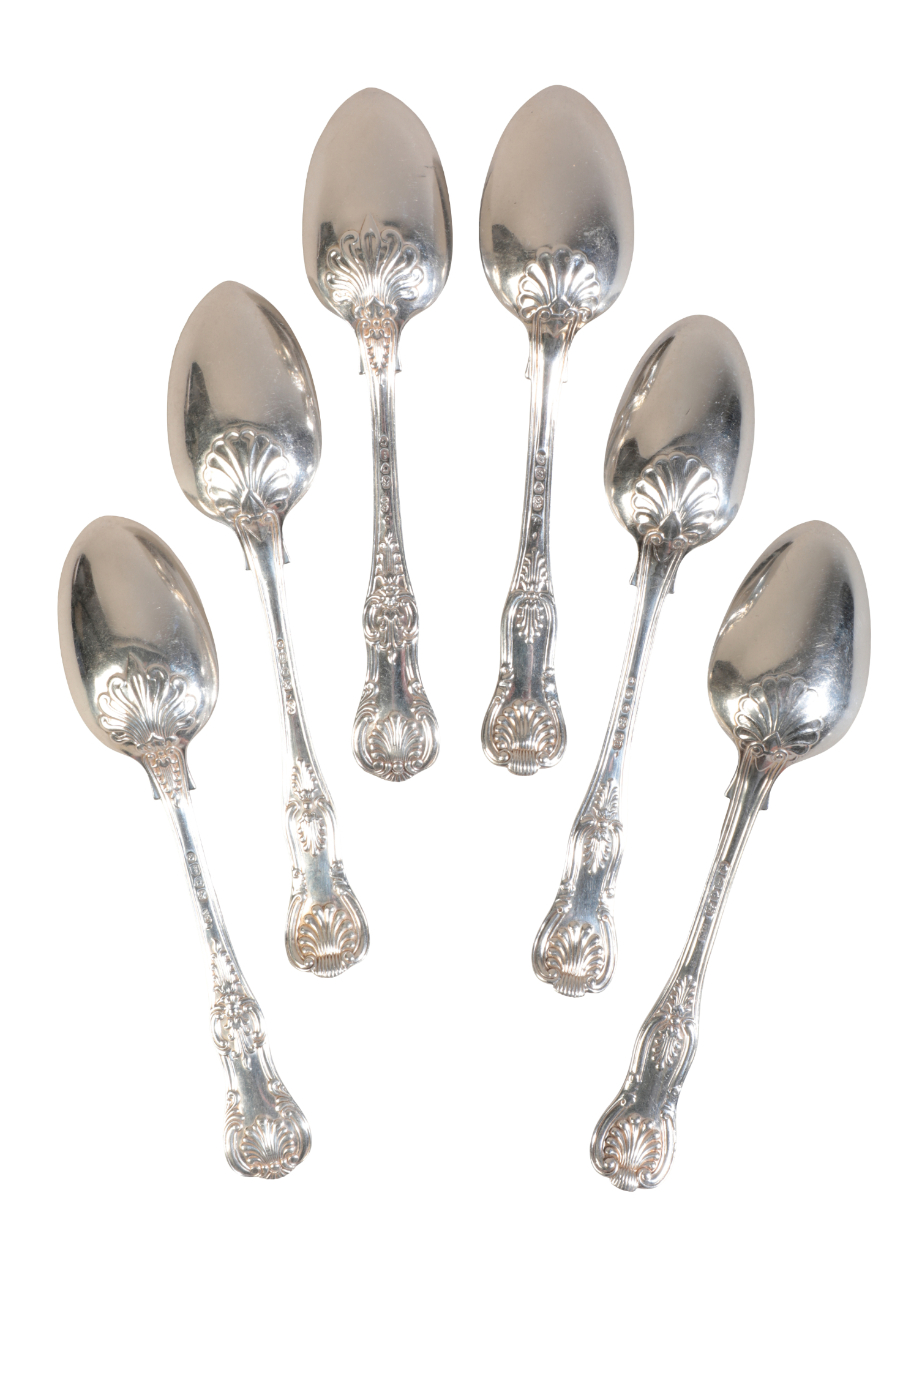 FOUR WILLIAM IV AND LATER SILVER KINGS PATTERN DESSERT SPOONS - Image 2 of 3